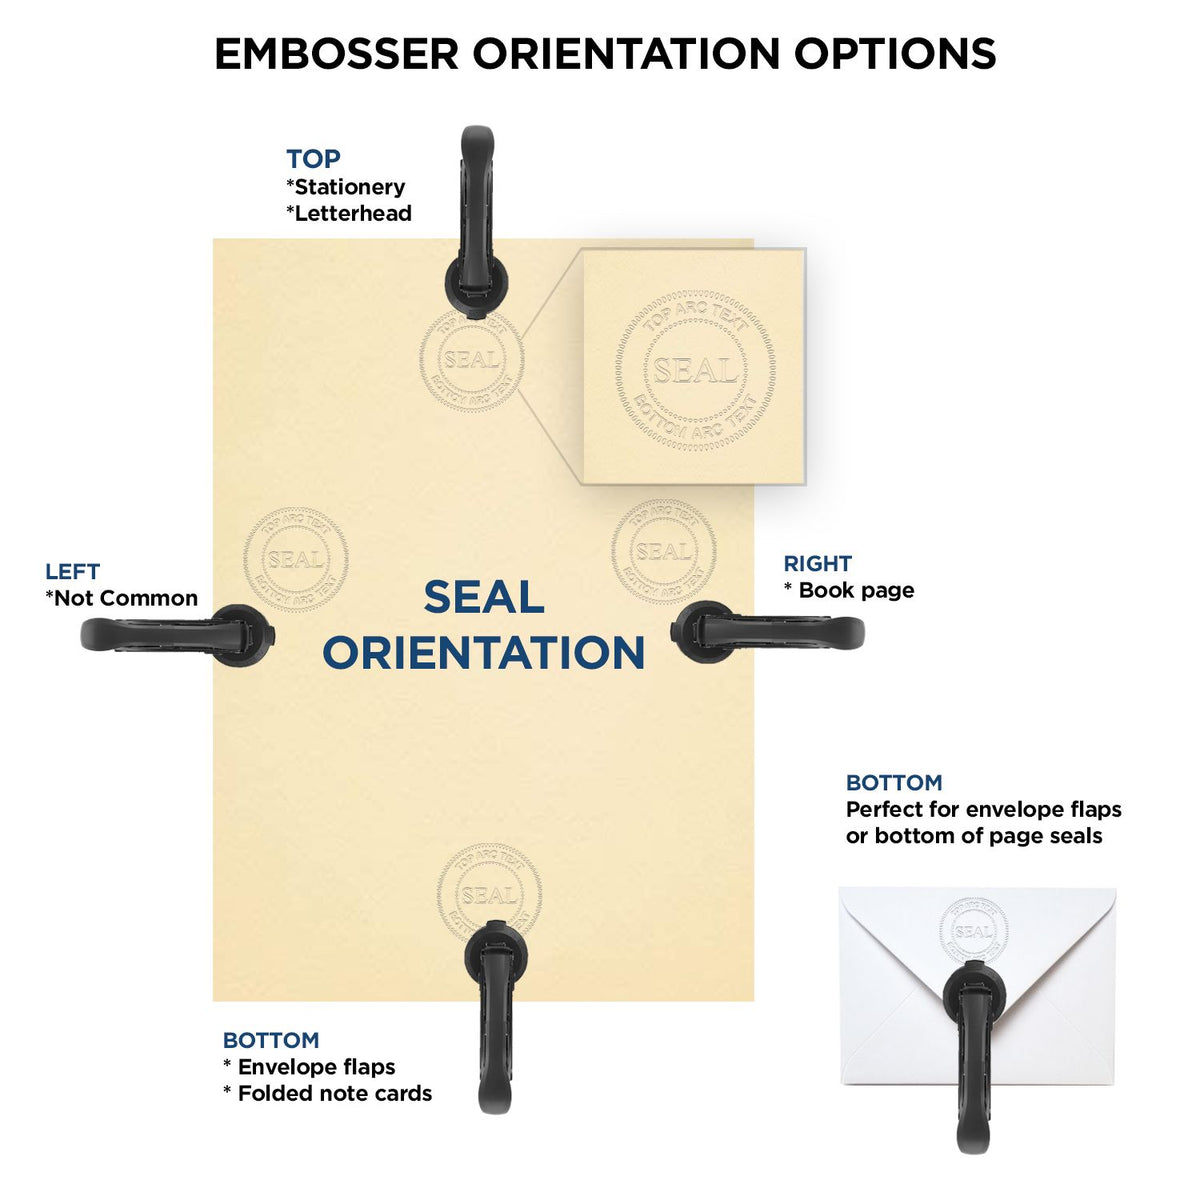 An infographic for the Heavy Duty Cast Iron Kentucky Land Surveyor Seal Embosser showing embosser orientation, this is showing examples of a top, bottom, right and left insert.